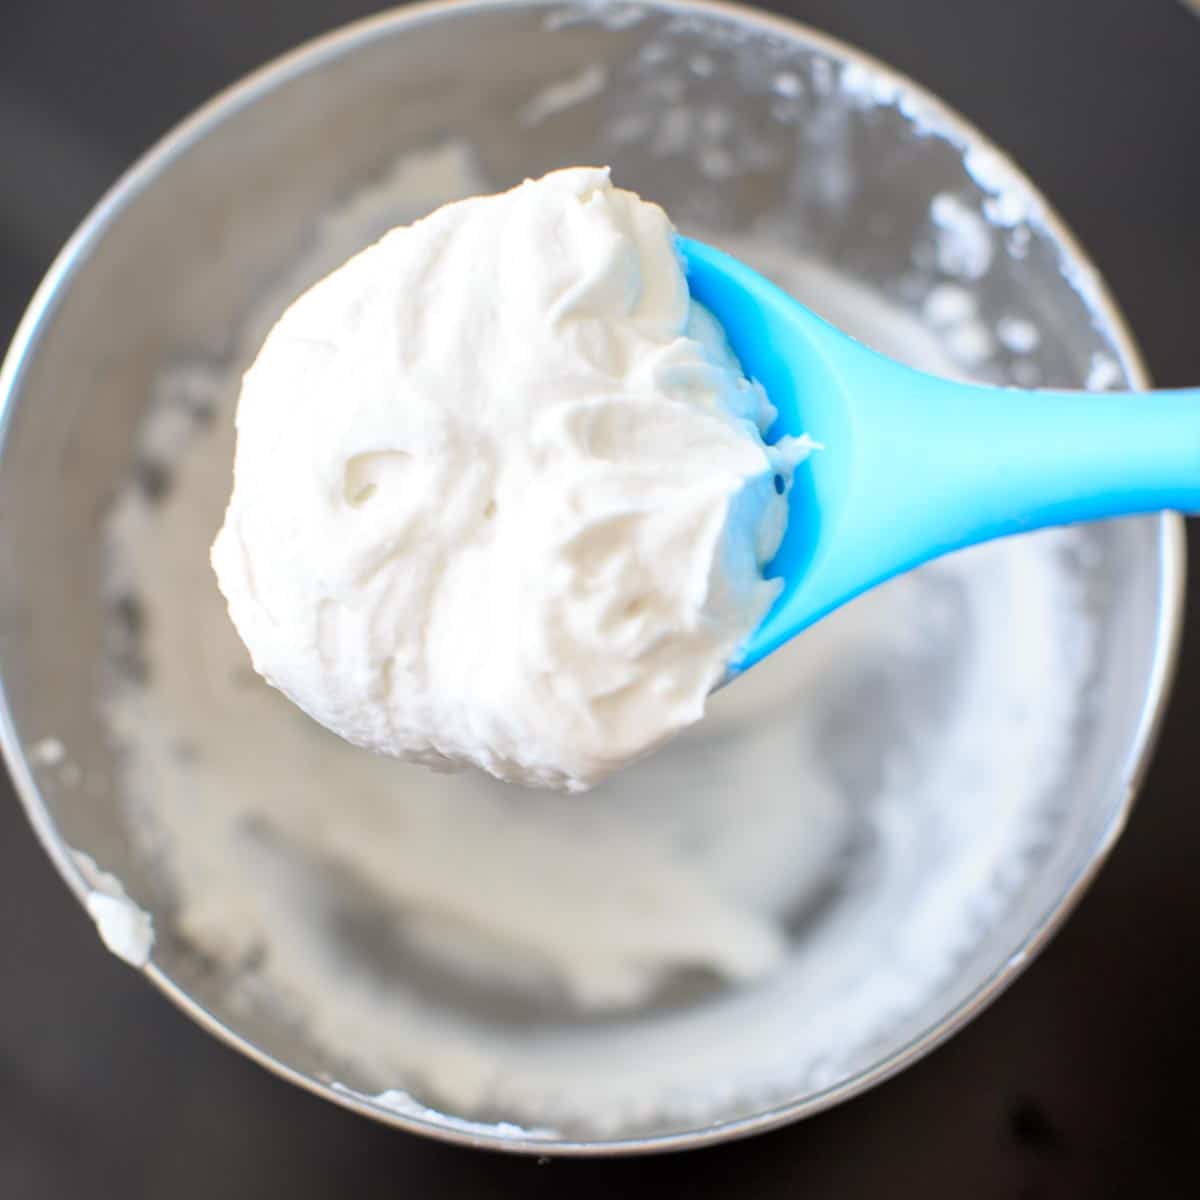 Vegan whipped cream made from coconut cream. Plus 4 flavors to try: chocolate, vanilla, peanut butter and cinnamon!